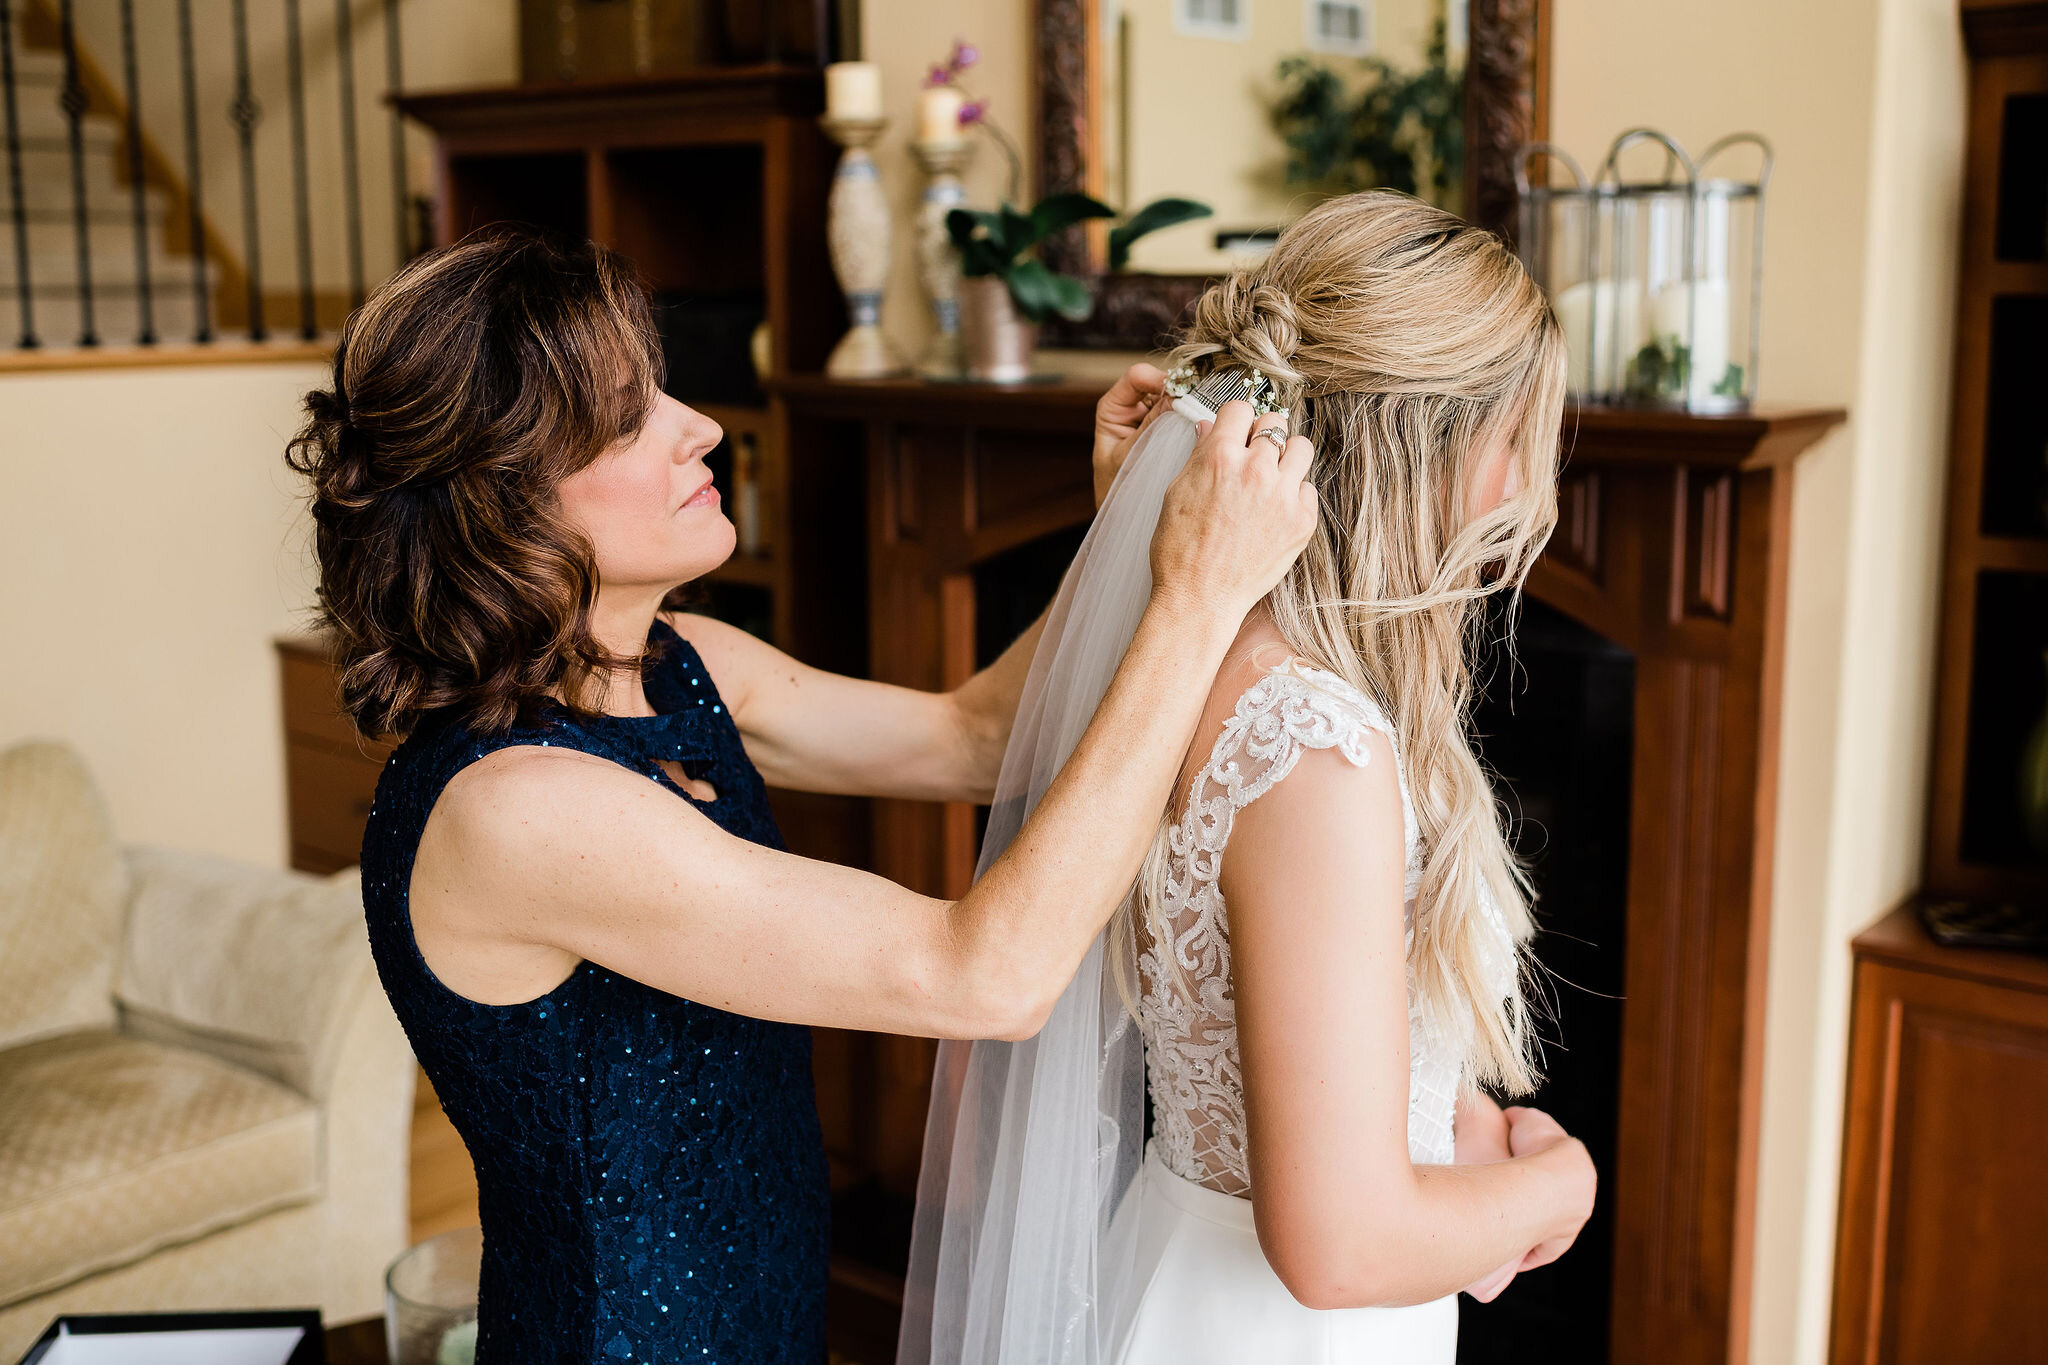 Mother of the bride putting bride's veil in